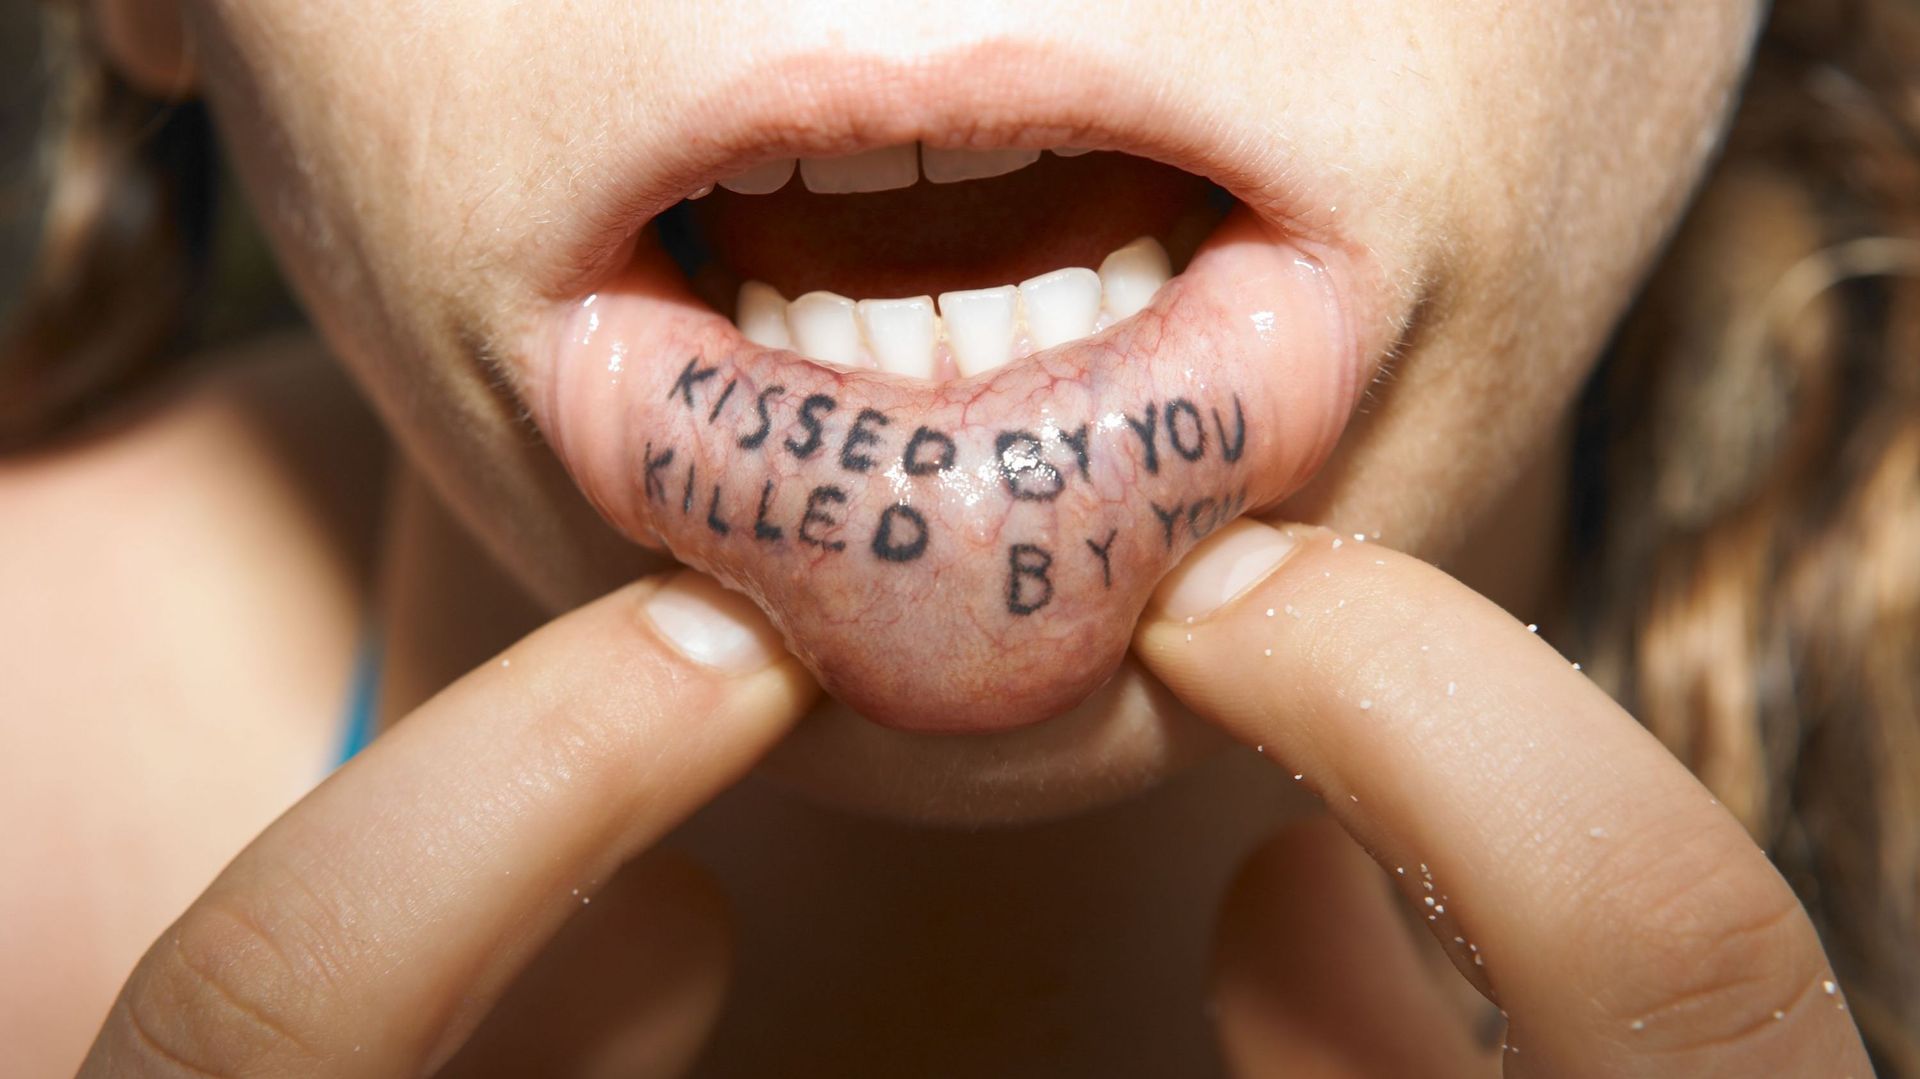 Kissed by you, killed by you tattooed on inside of woman&#39;s lip